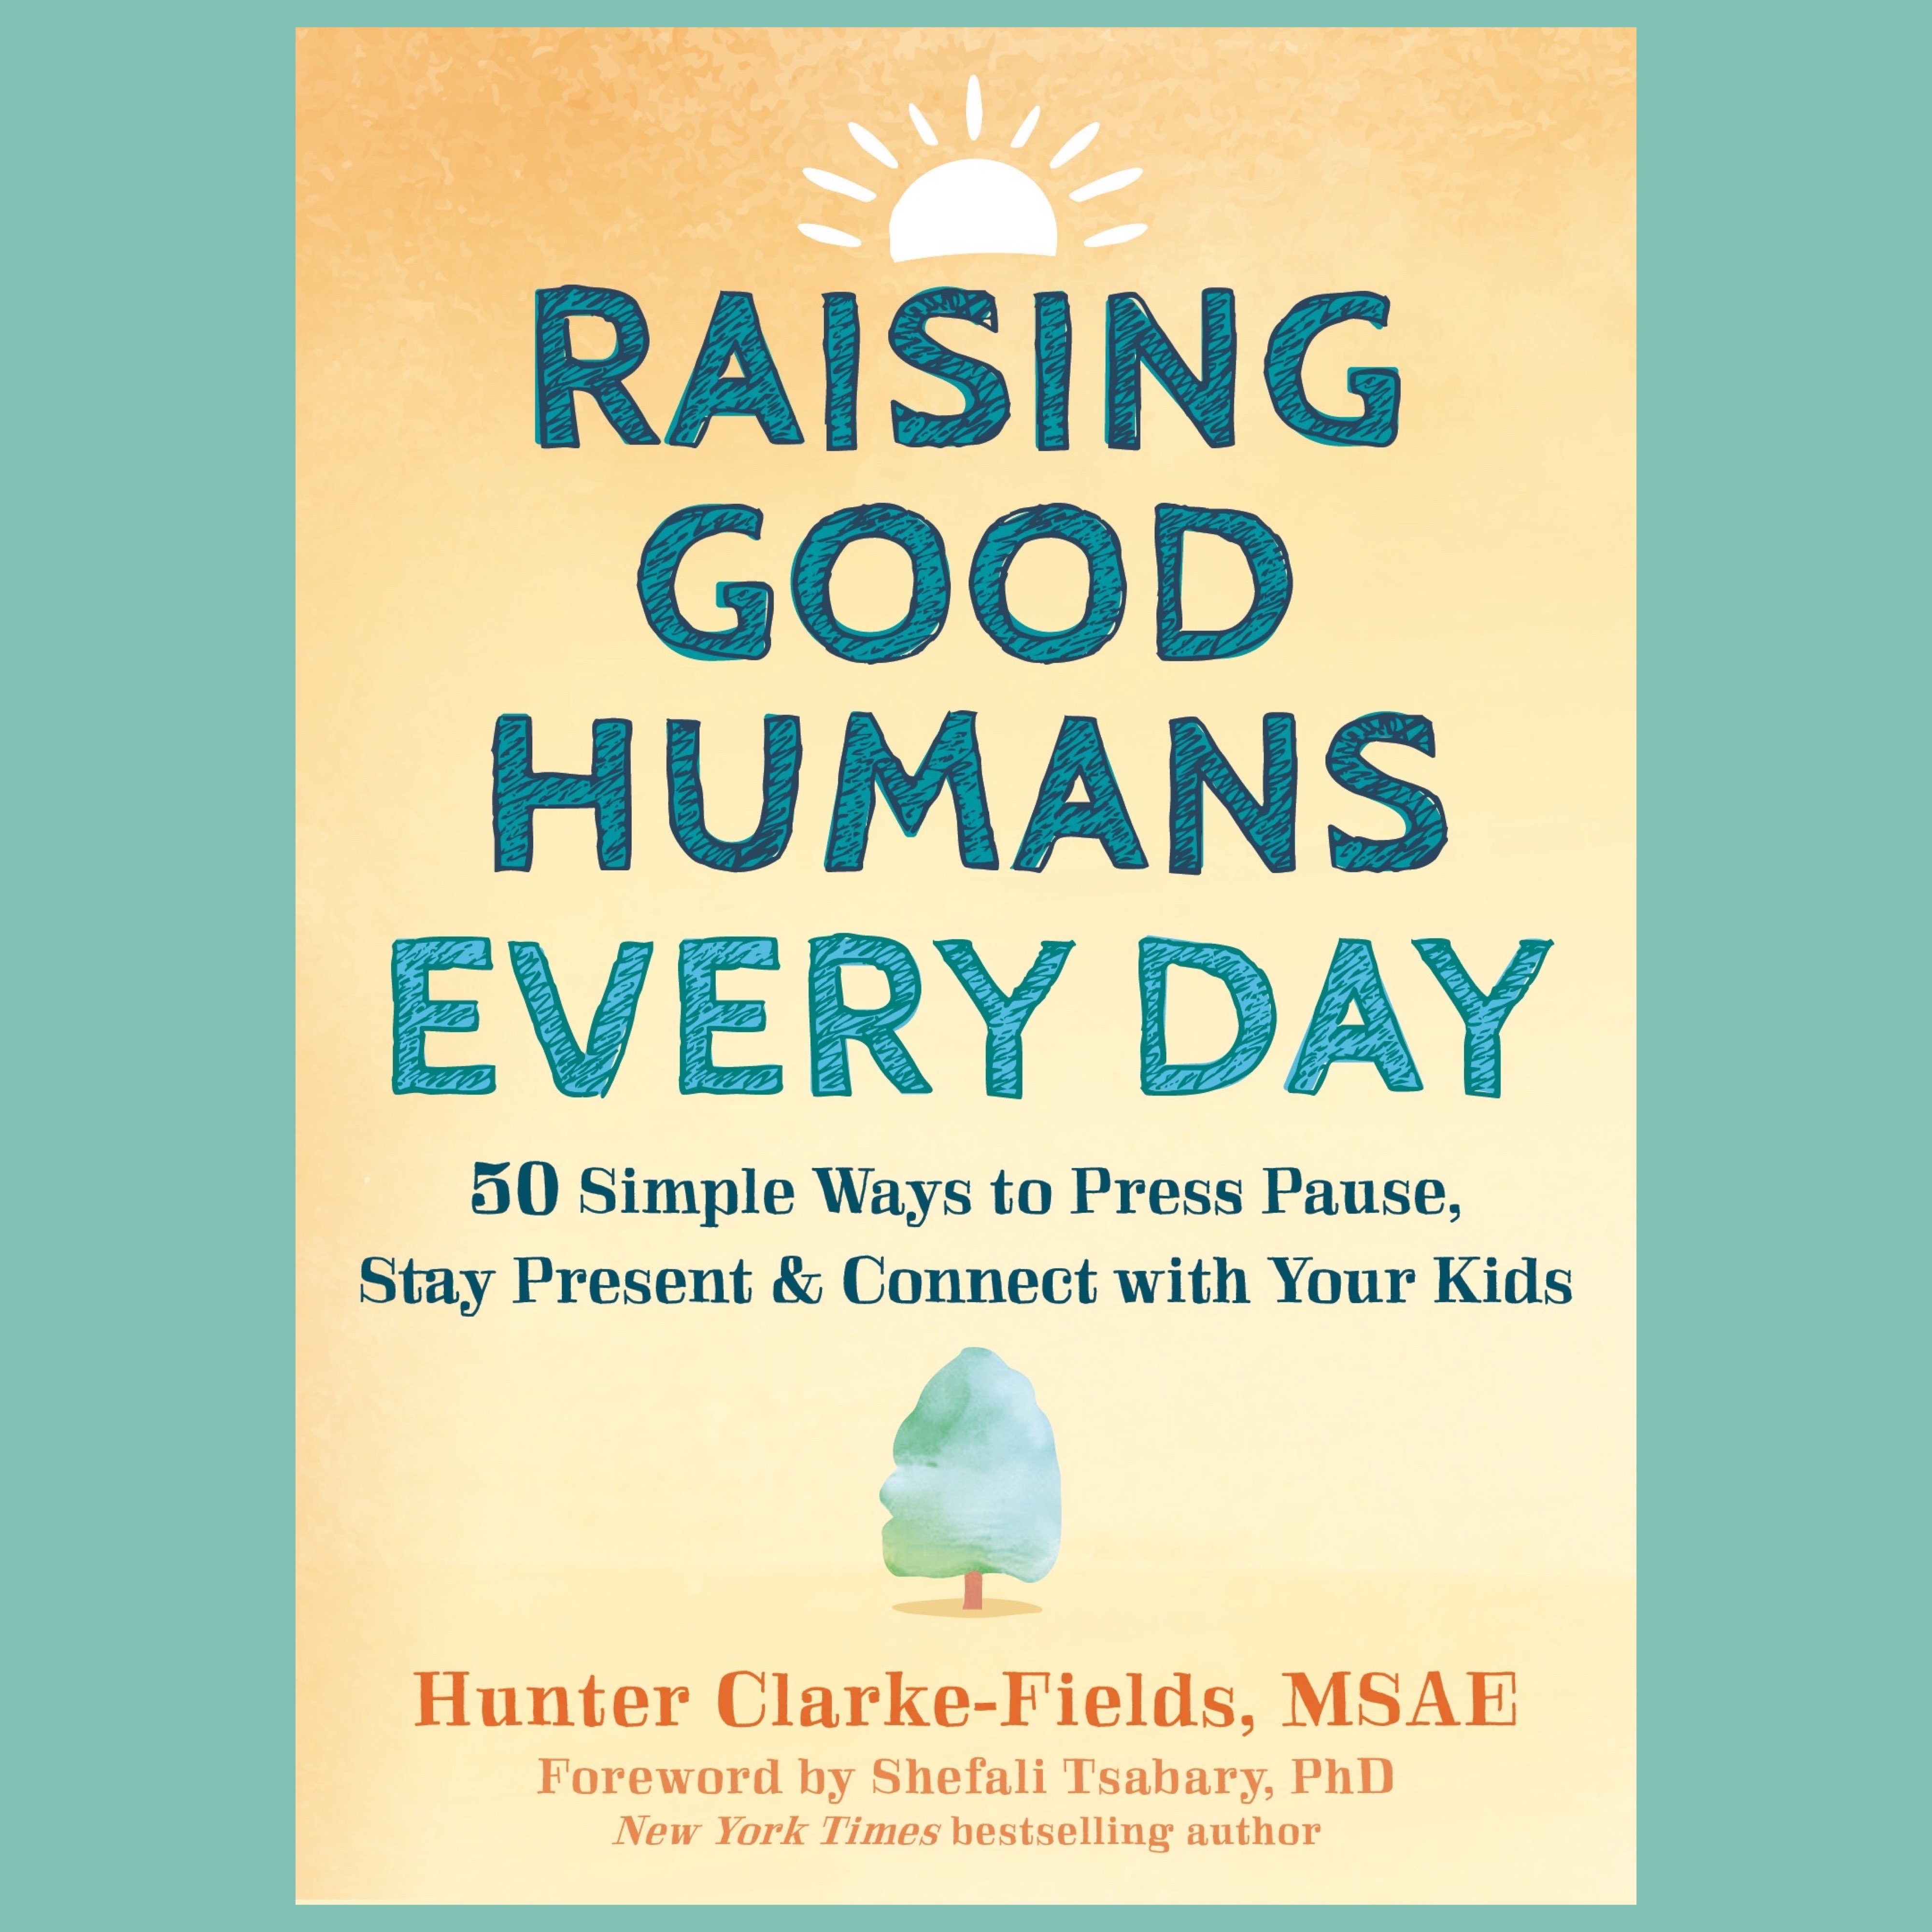 Raising Good Humans Online Summit July 11-14 will be hosted by Mindful Mama Mentor and Author Hunter Clarke-Fields in sync with her new book launch for "Raising Good Humans Every Day".